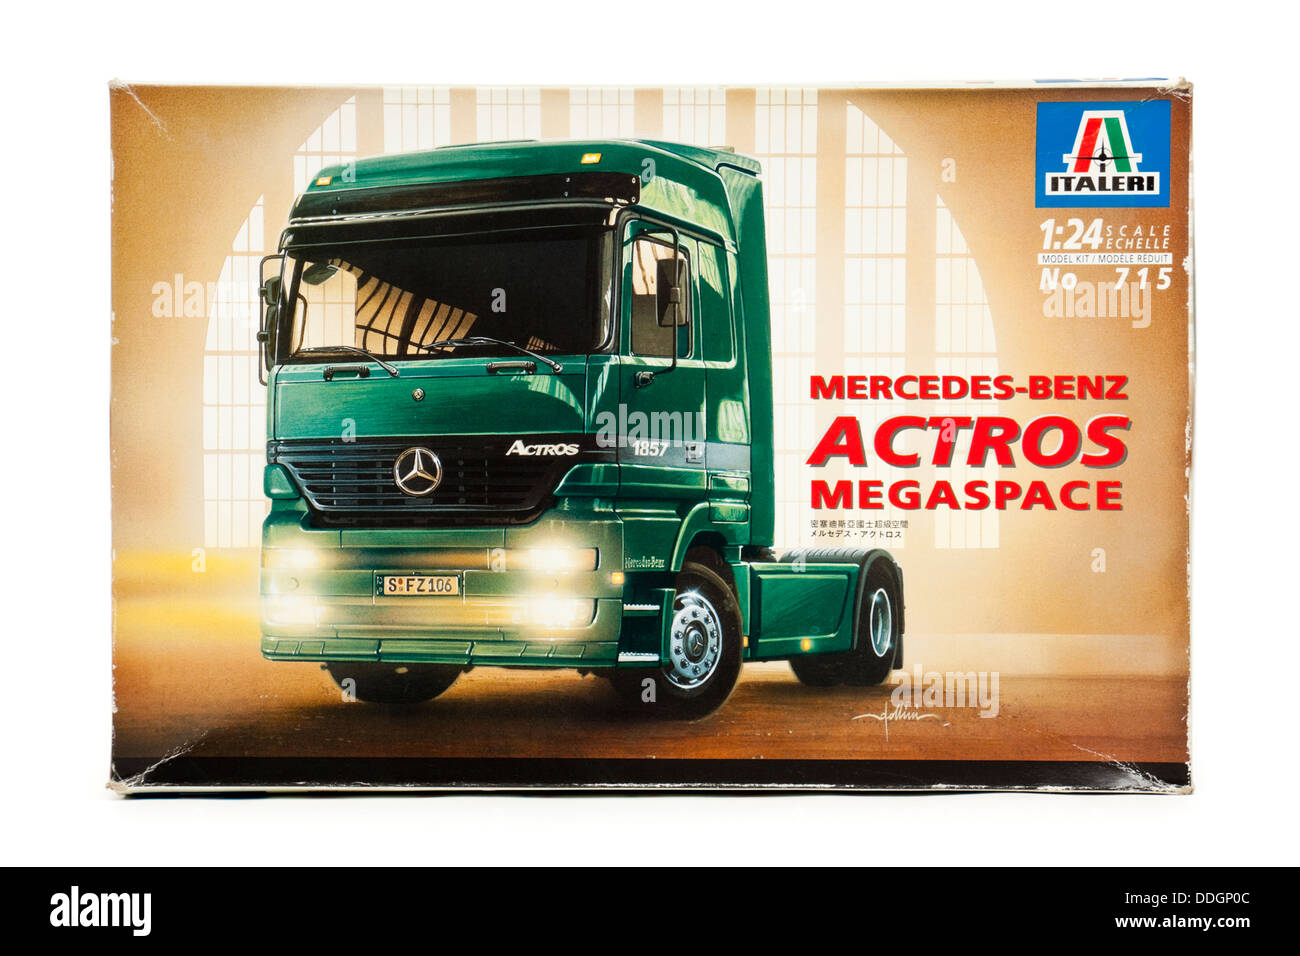 Italeri 1:24 scale model kit (No 715) of Mercedes-Benz Actros Megaspace truck from 1998 Stock Photo